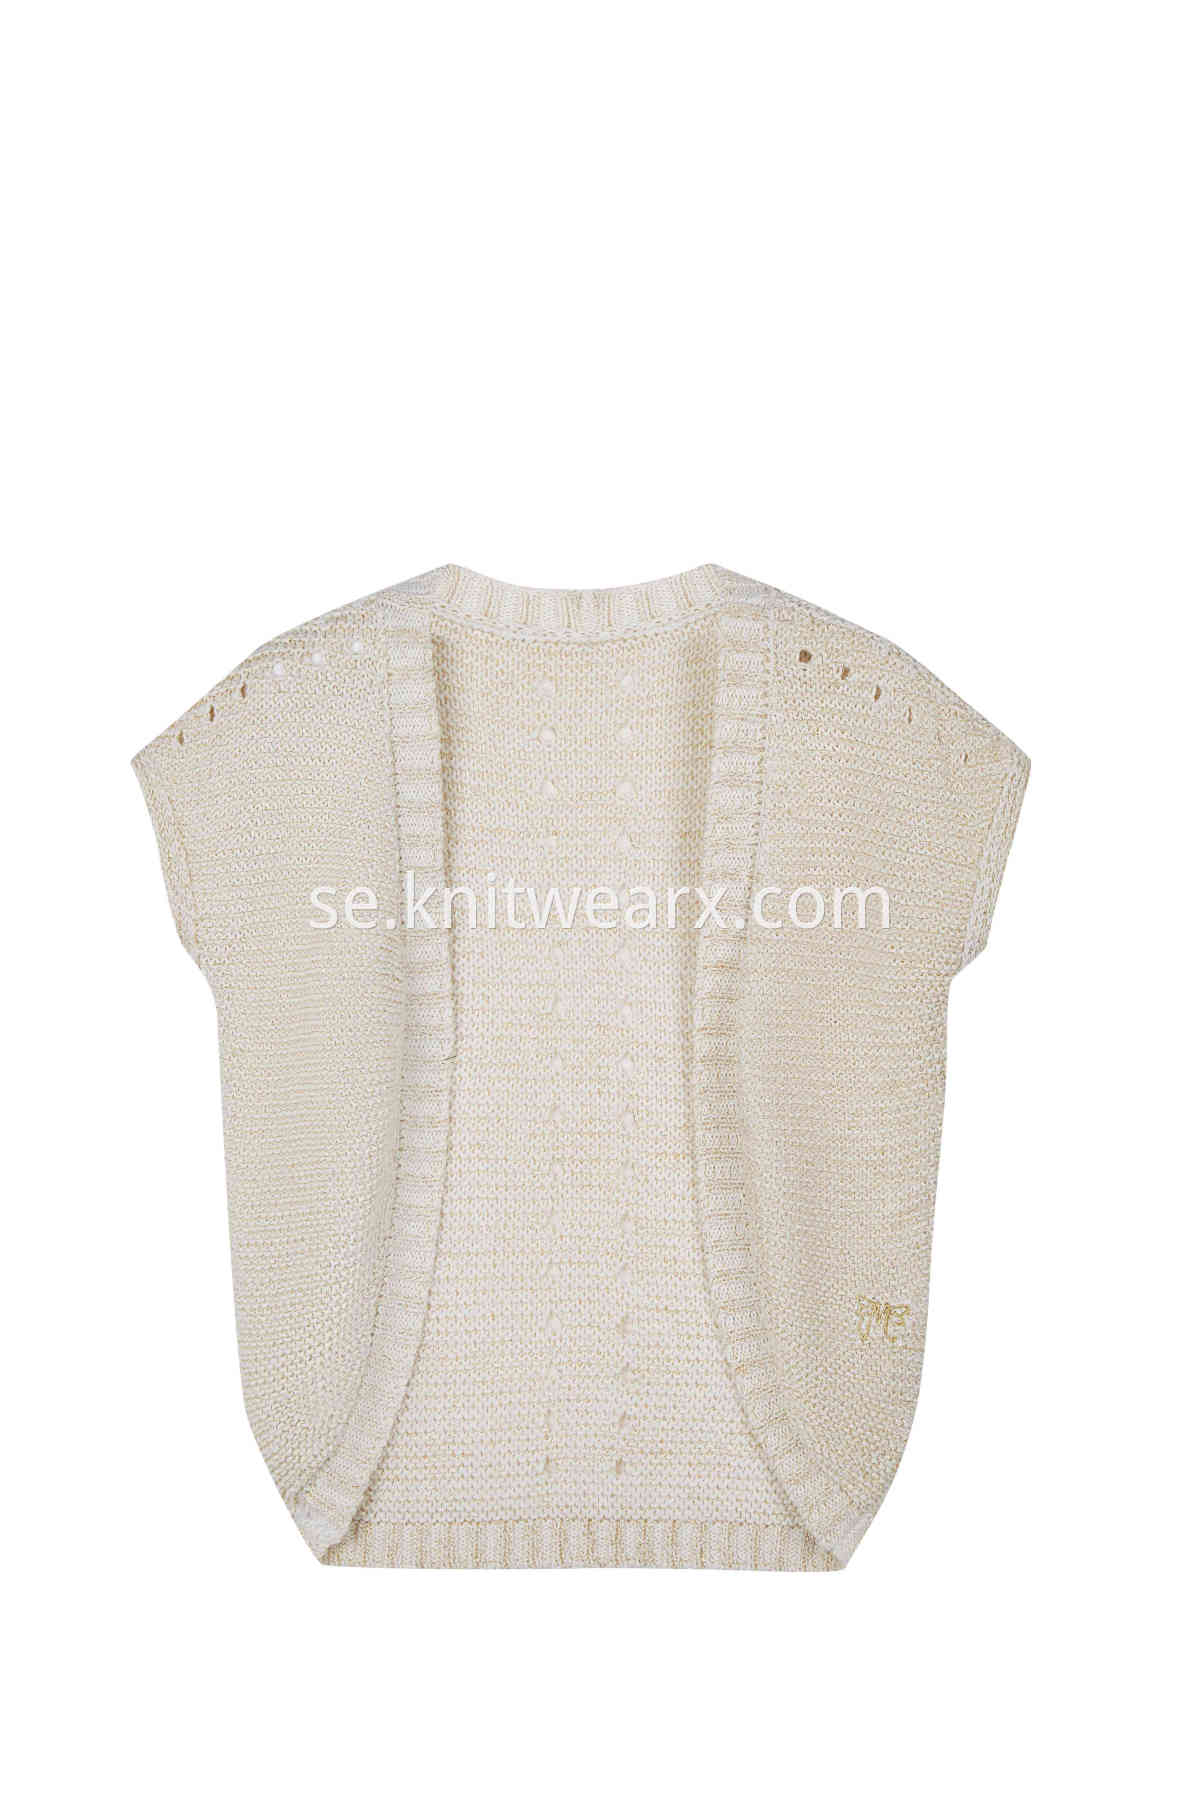 Girls's Summer Hollow knit Open Front Cardigan Cape